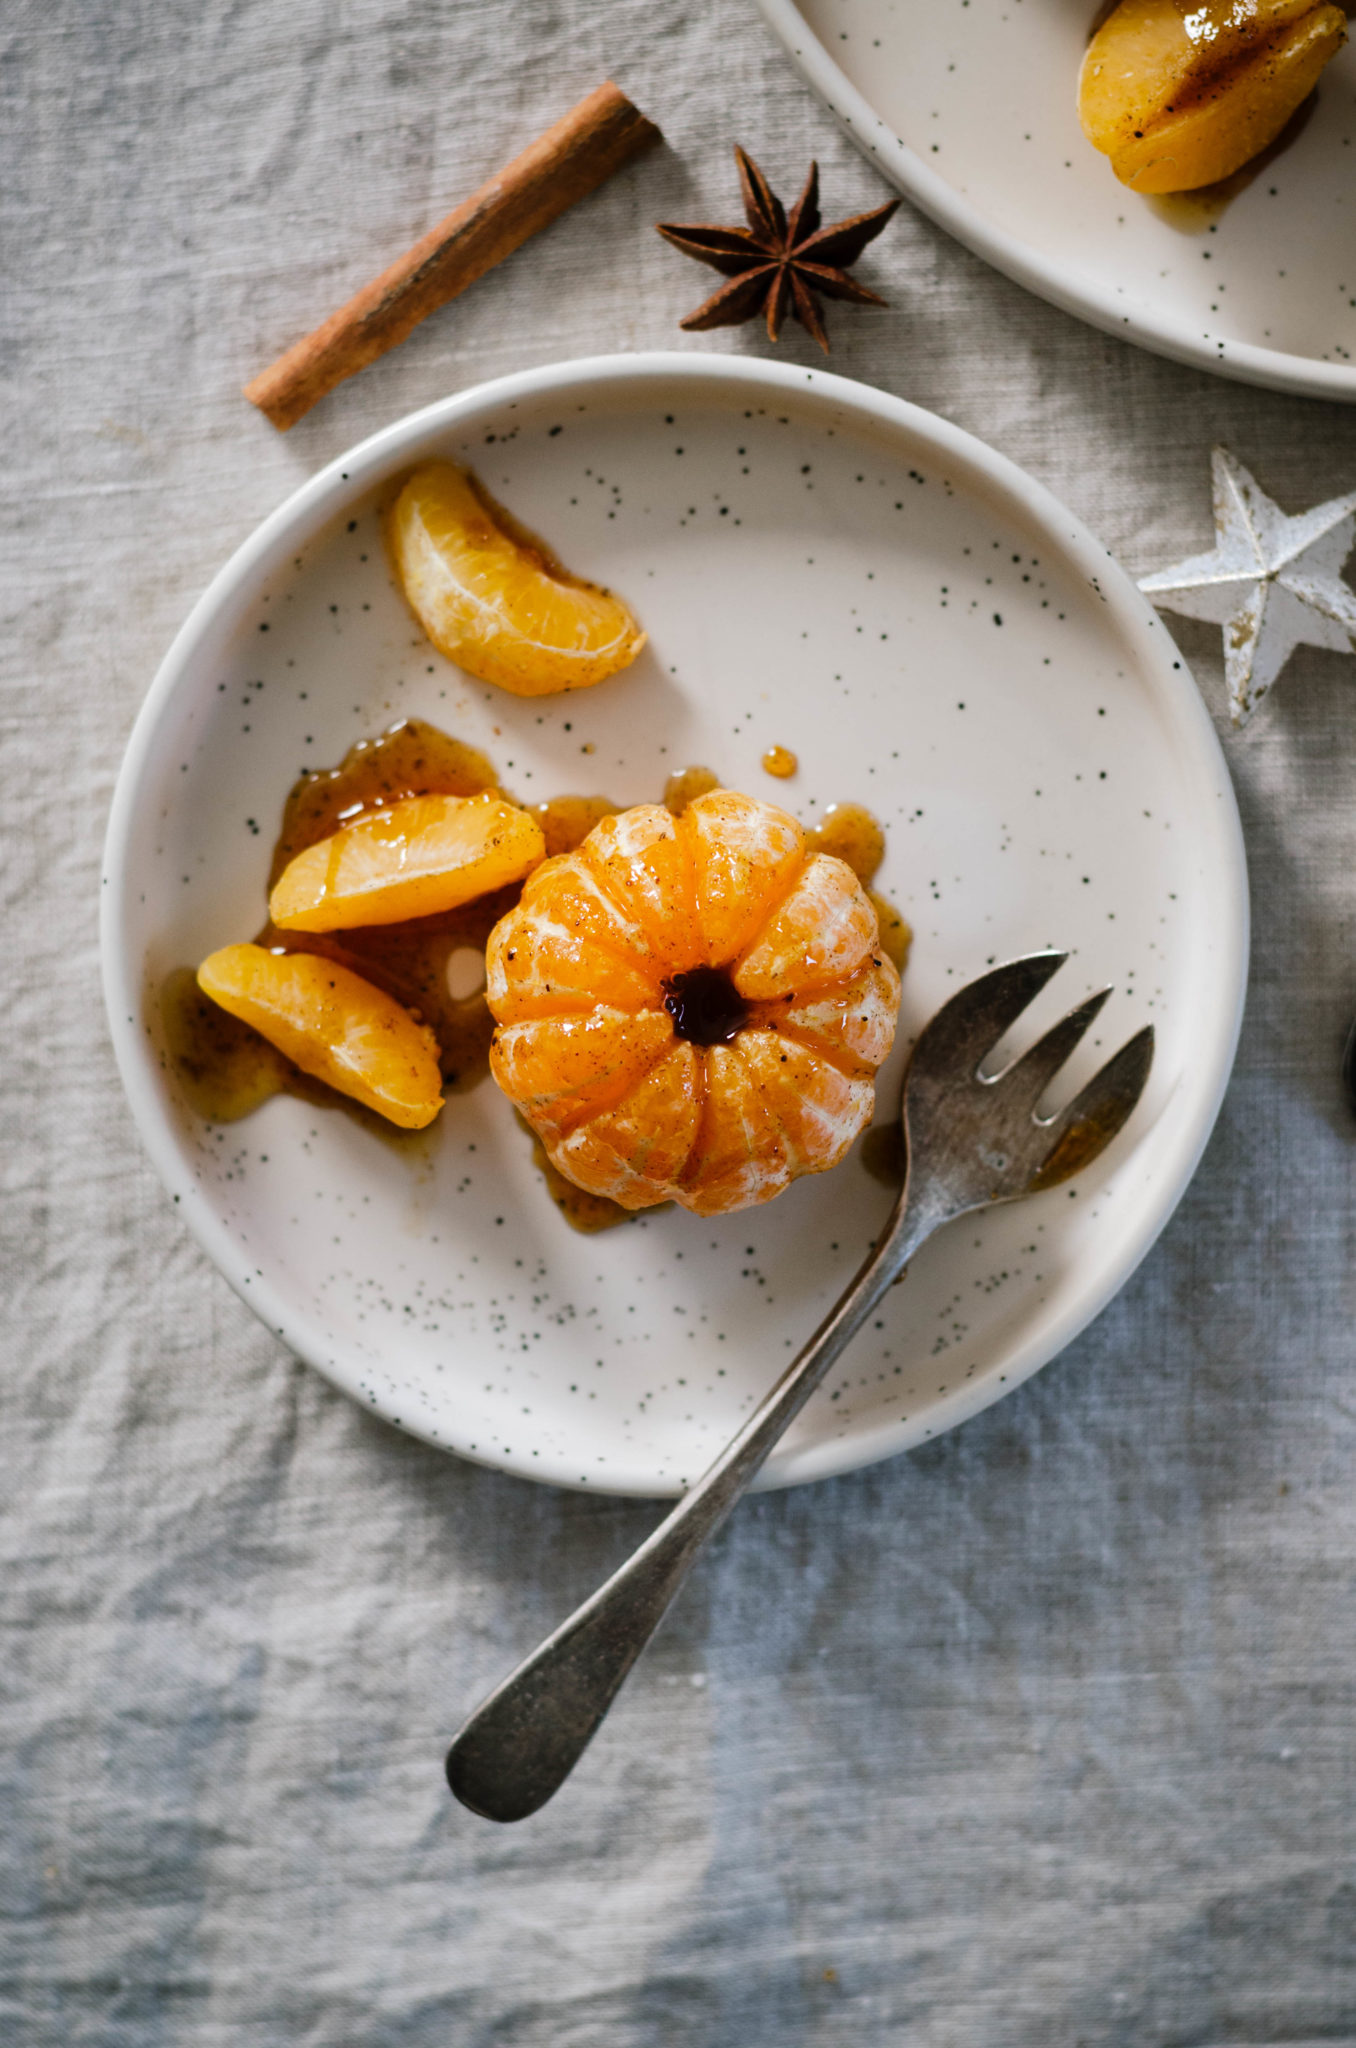 clementine with honey syrup and Christmas spices recipe